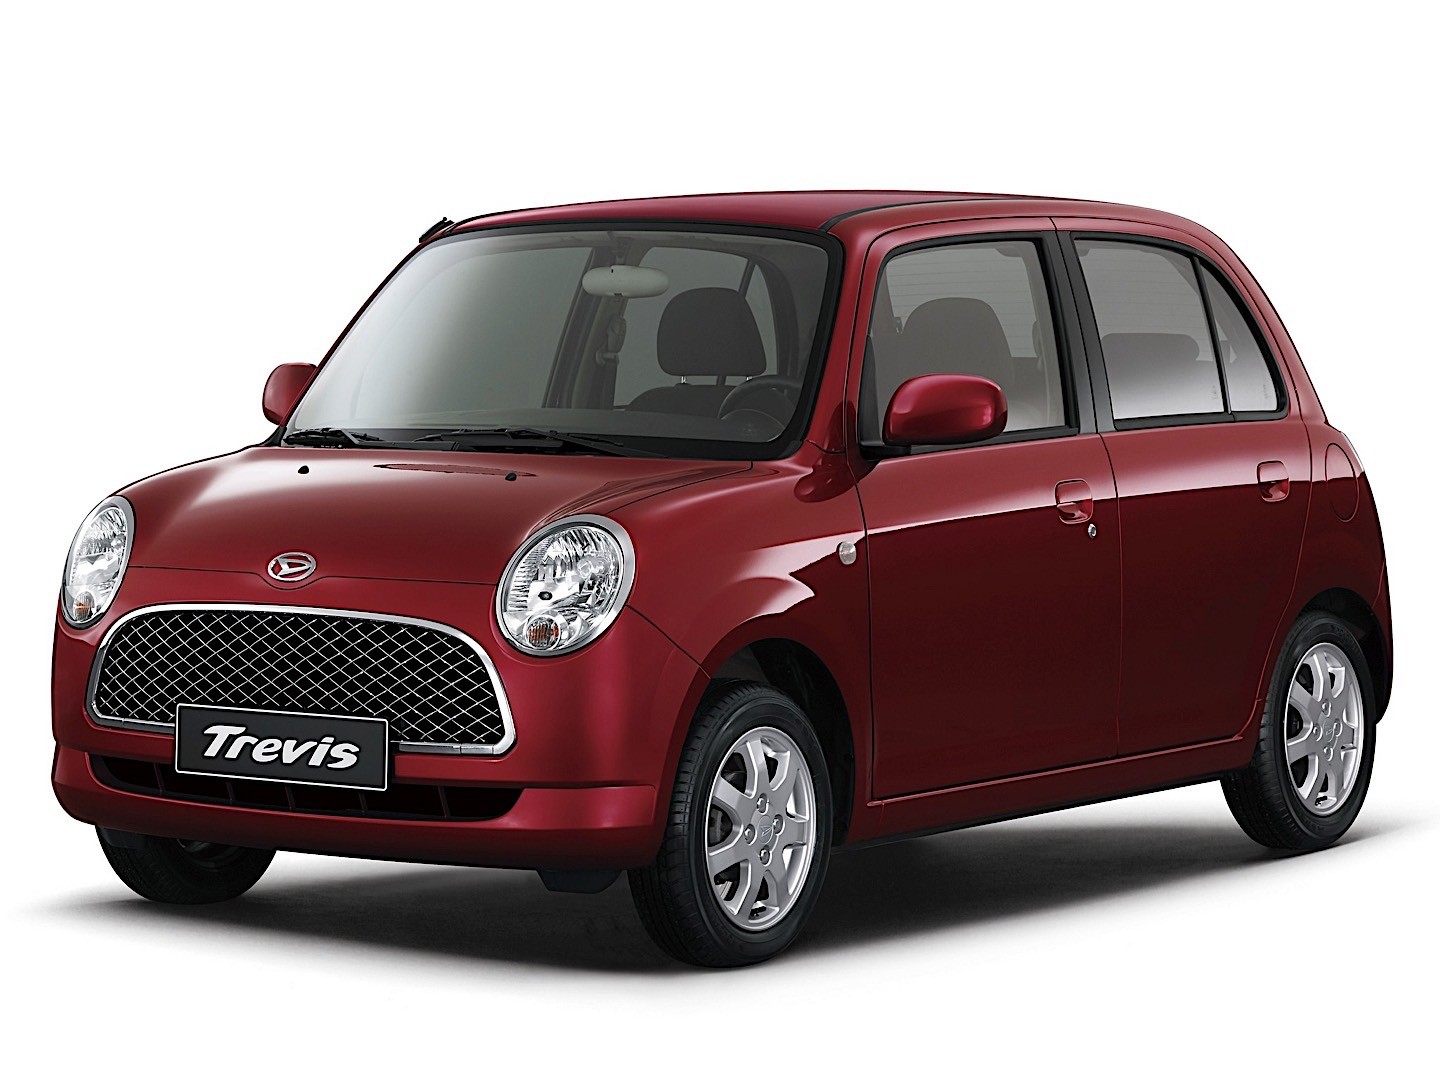 Guide to Choose Daihatsu Trevis: Features and Price